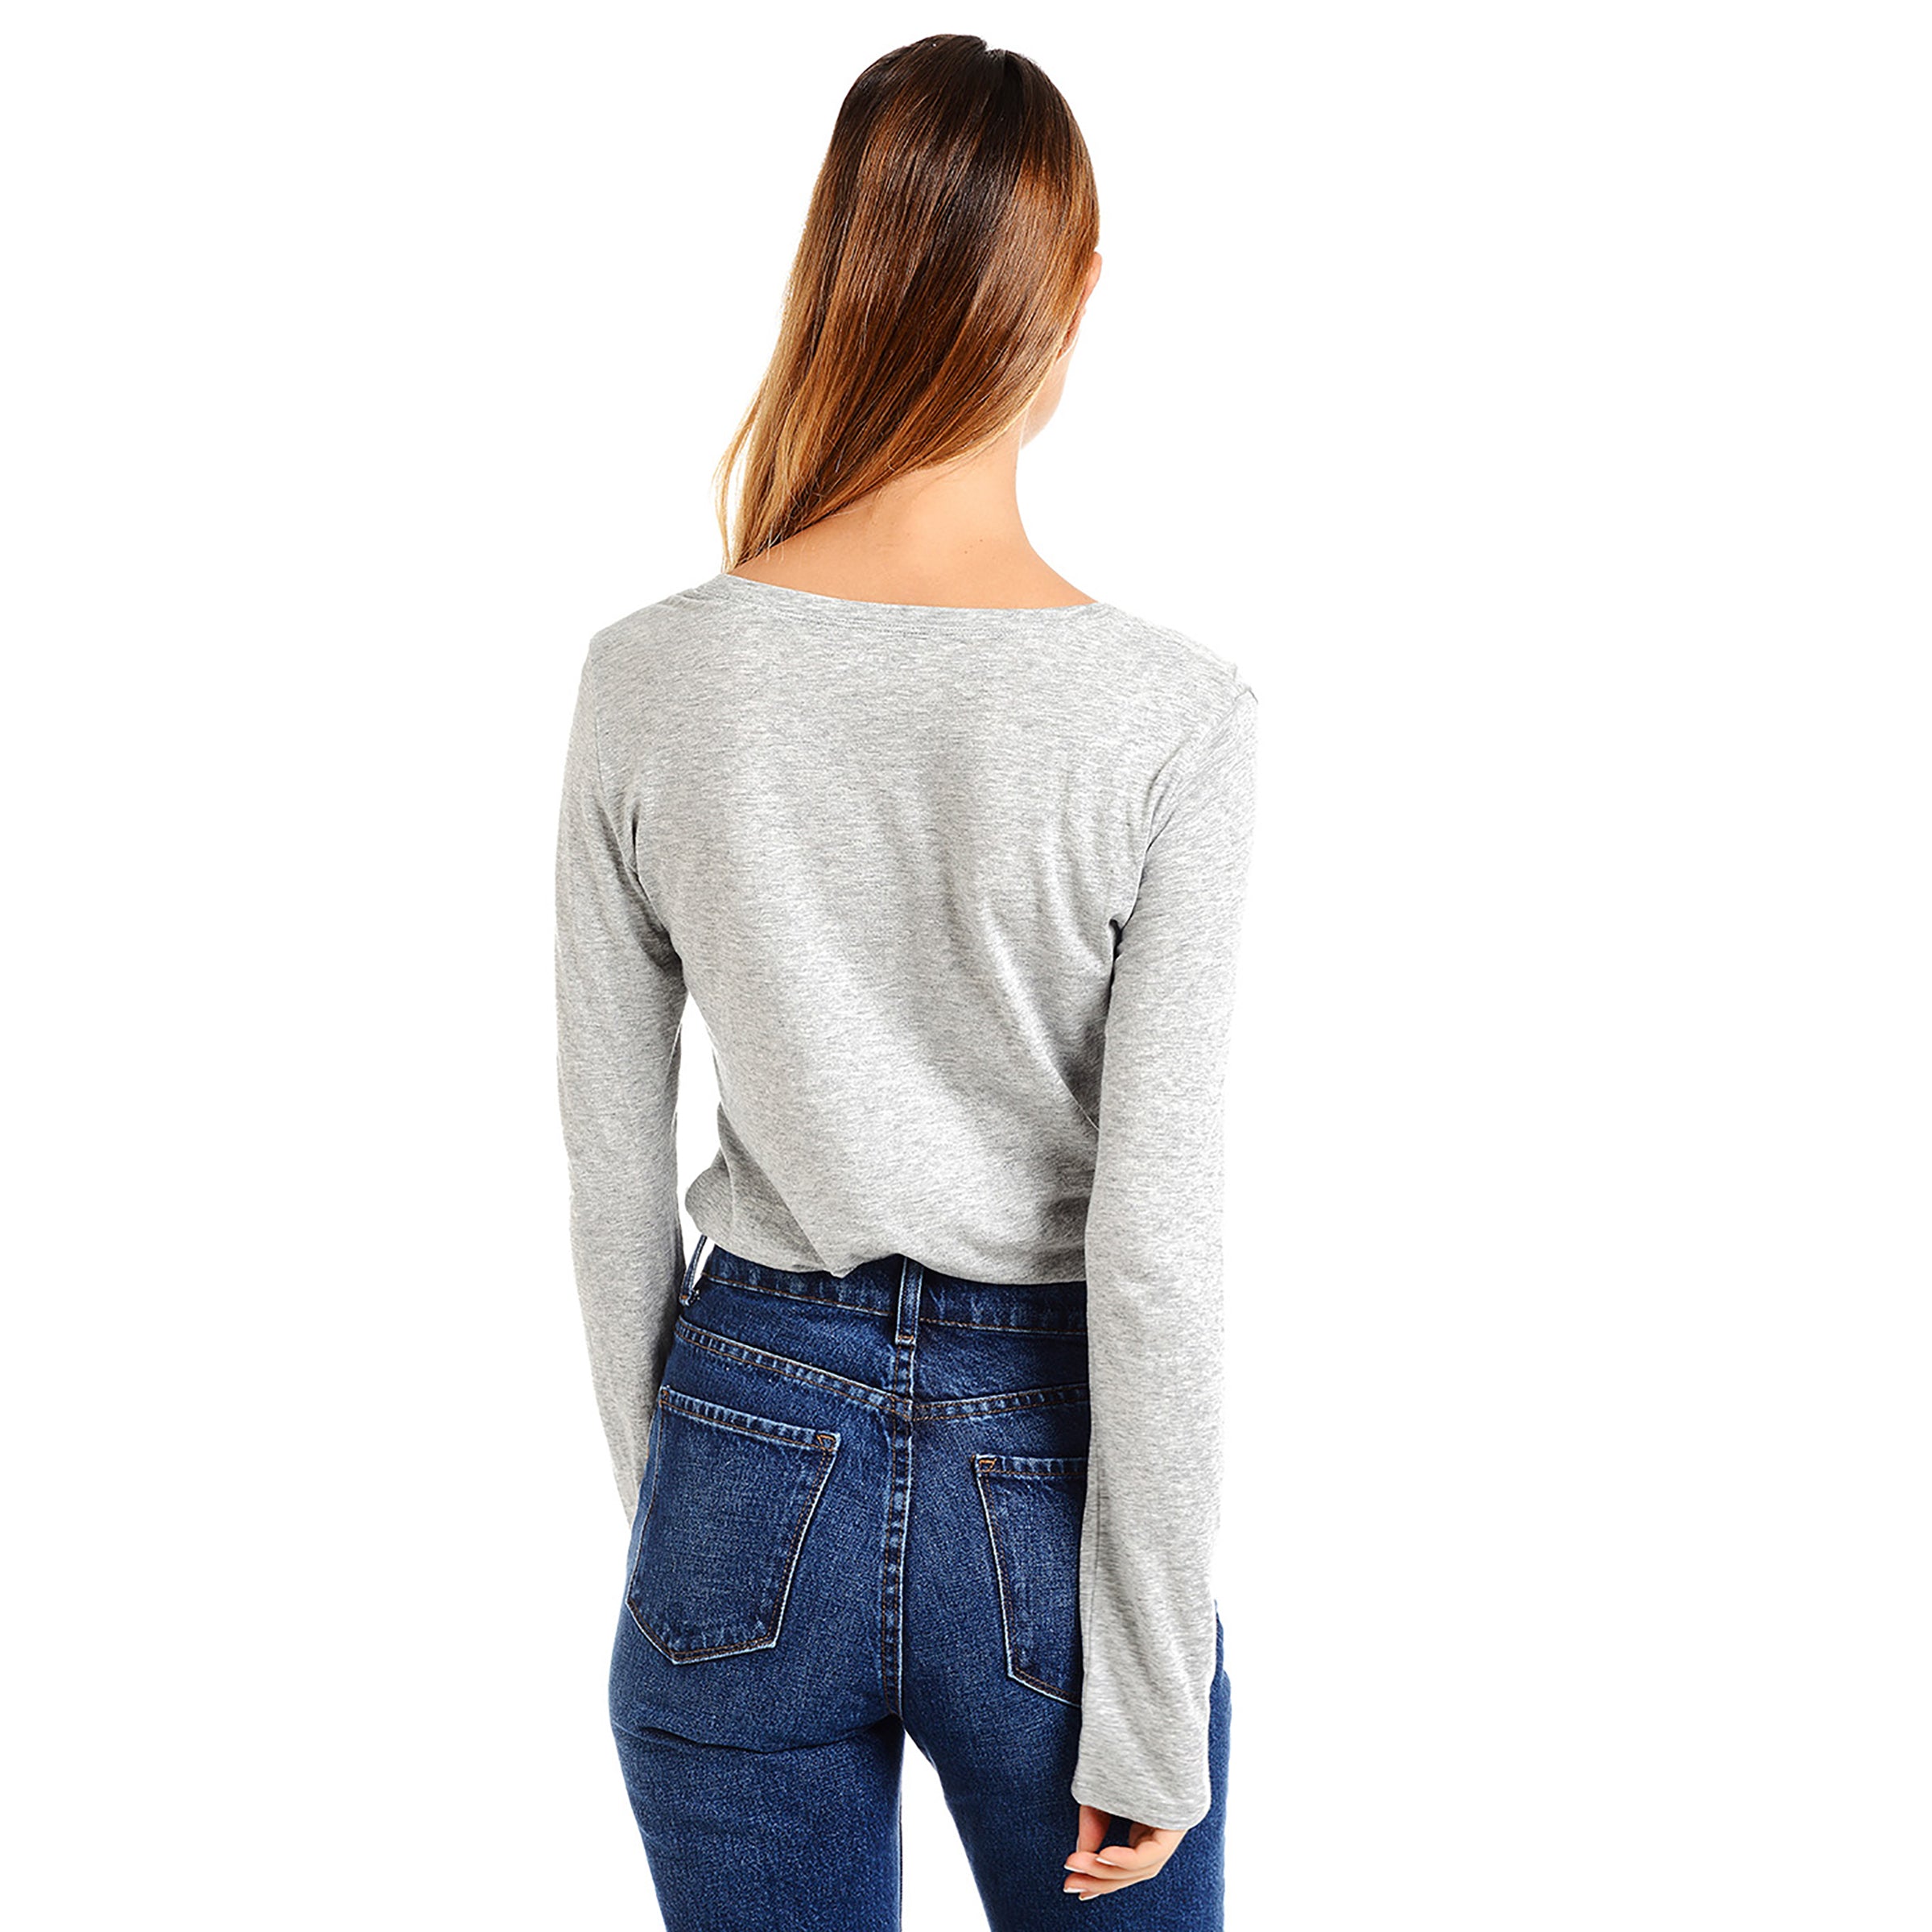 Women wearing Gris Chiné Long Sleeve V-Neck Tee Marcy